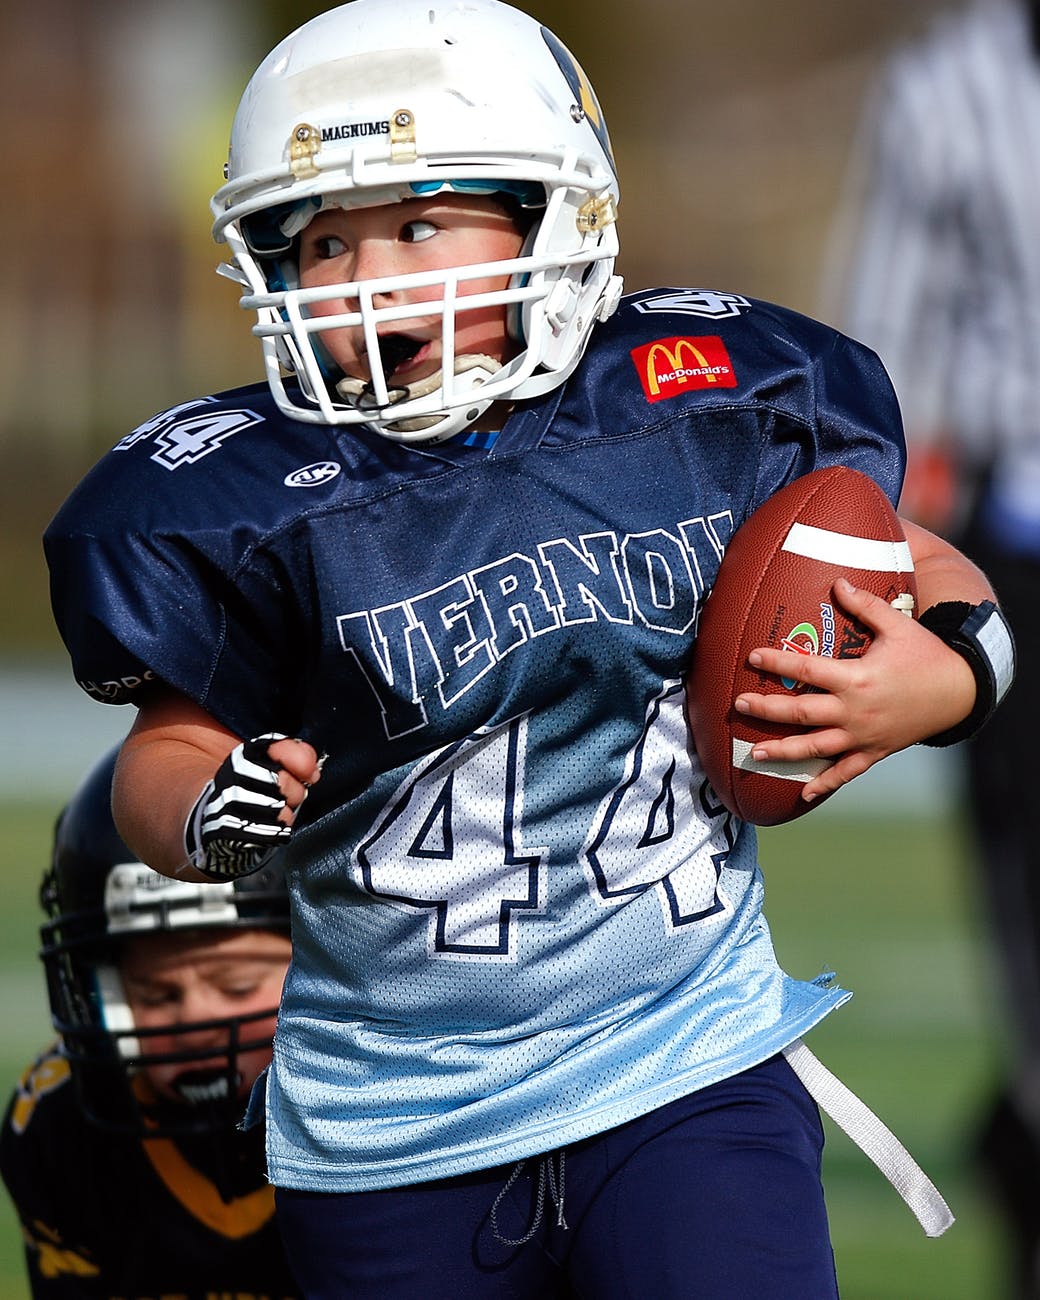 boy wearing football gear while holding football